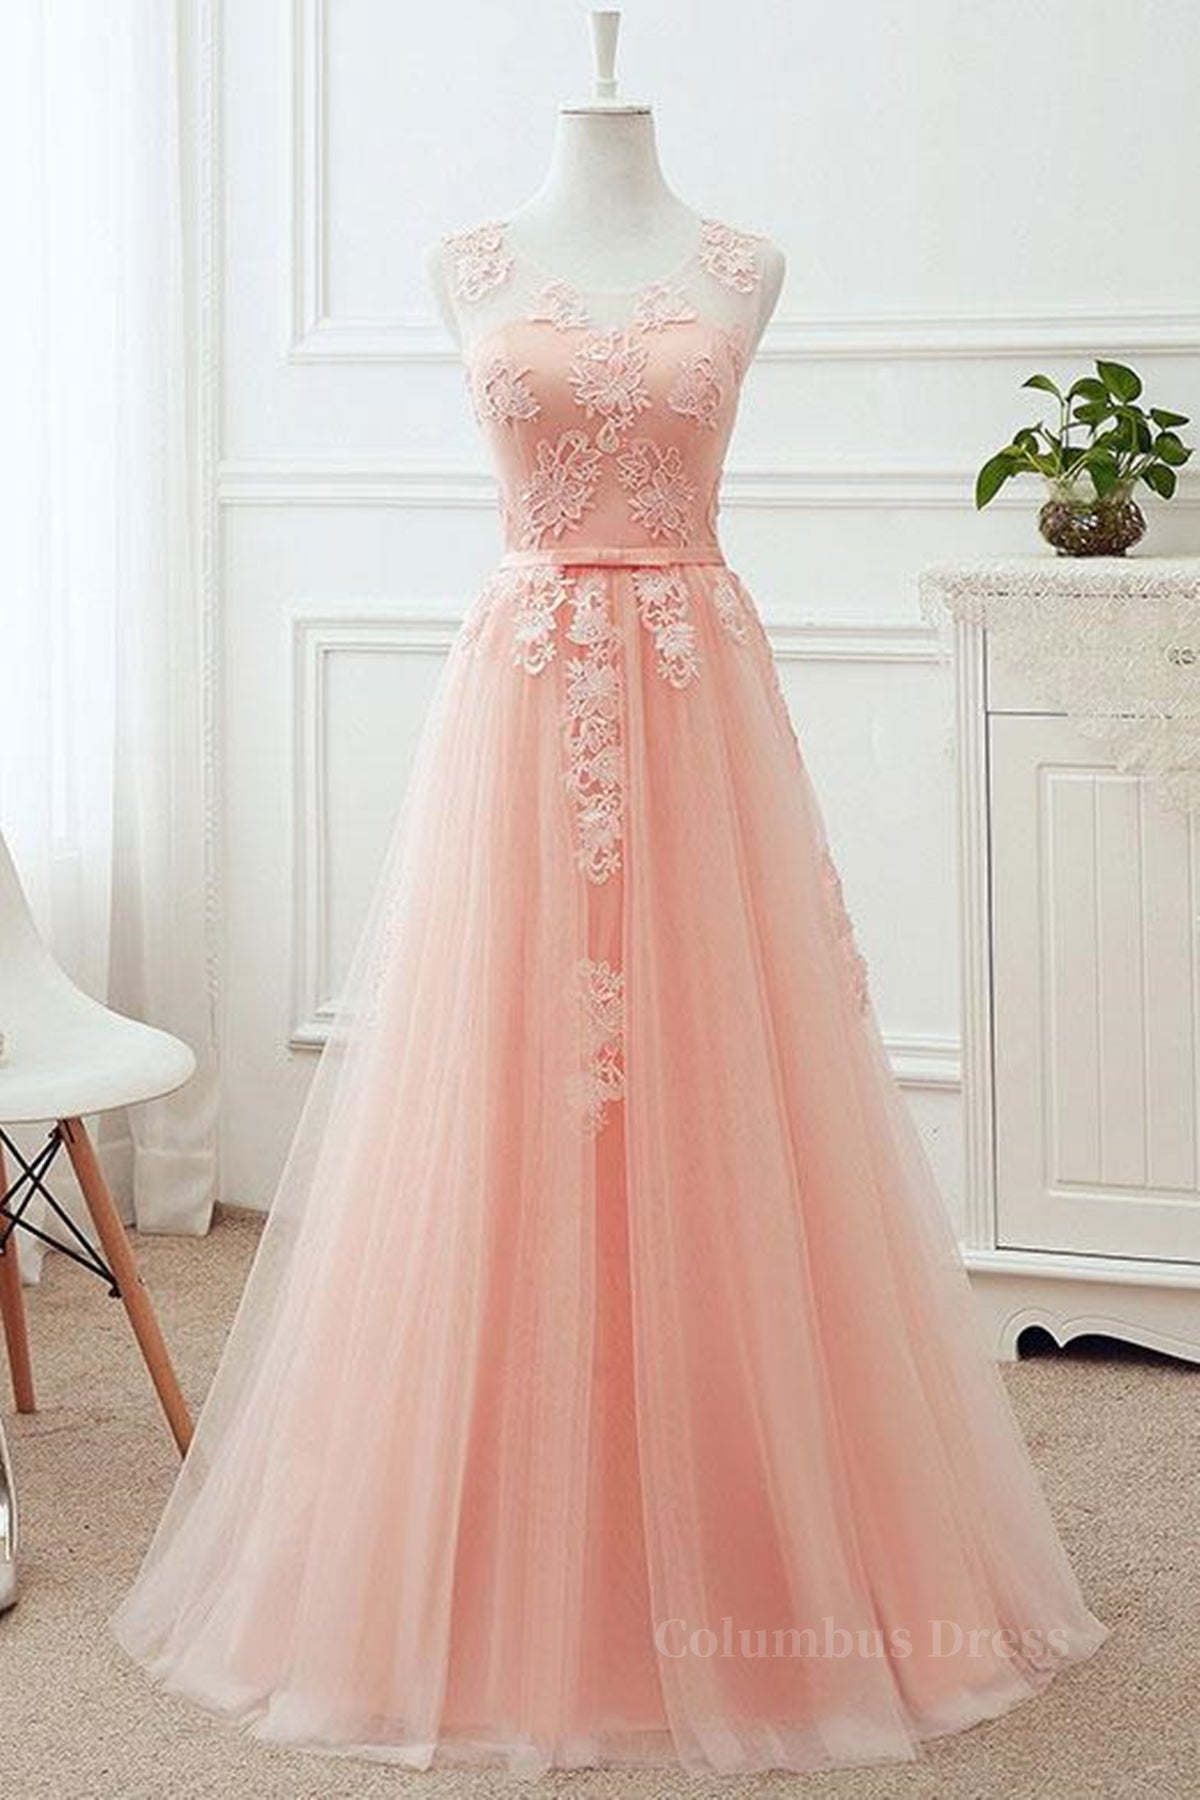 Classy Gown, Round Neck Pink Lace Long Prom Dresses, Pink Lace Bridesmaid Dresses